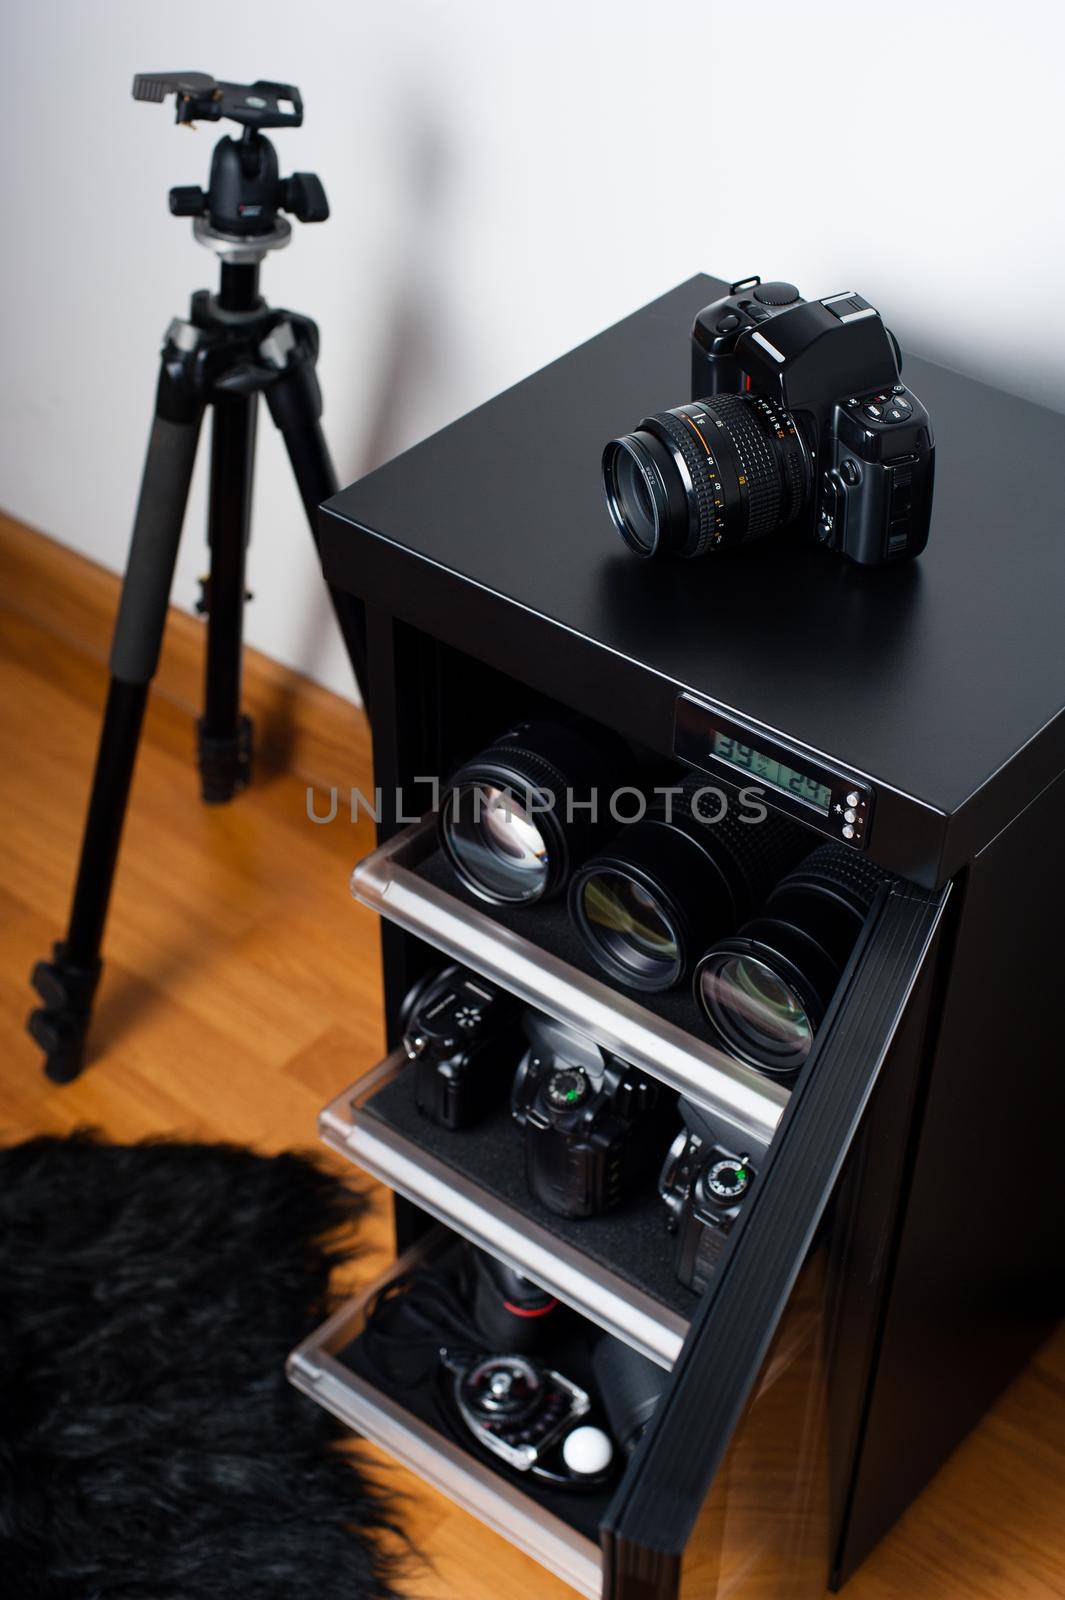 electronic dehumidify dry cabinet for storage cameras lens and other photography equipment. Shallow depth of field, closeup at camera on the cabinet.